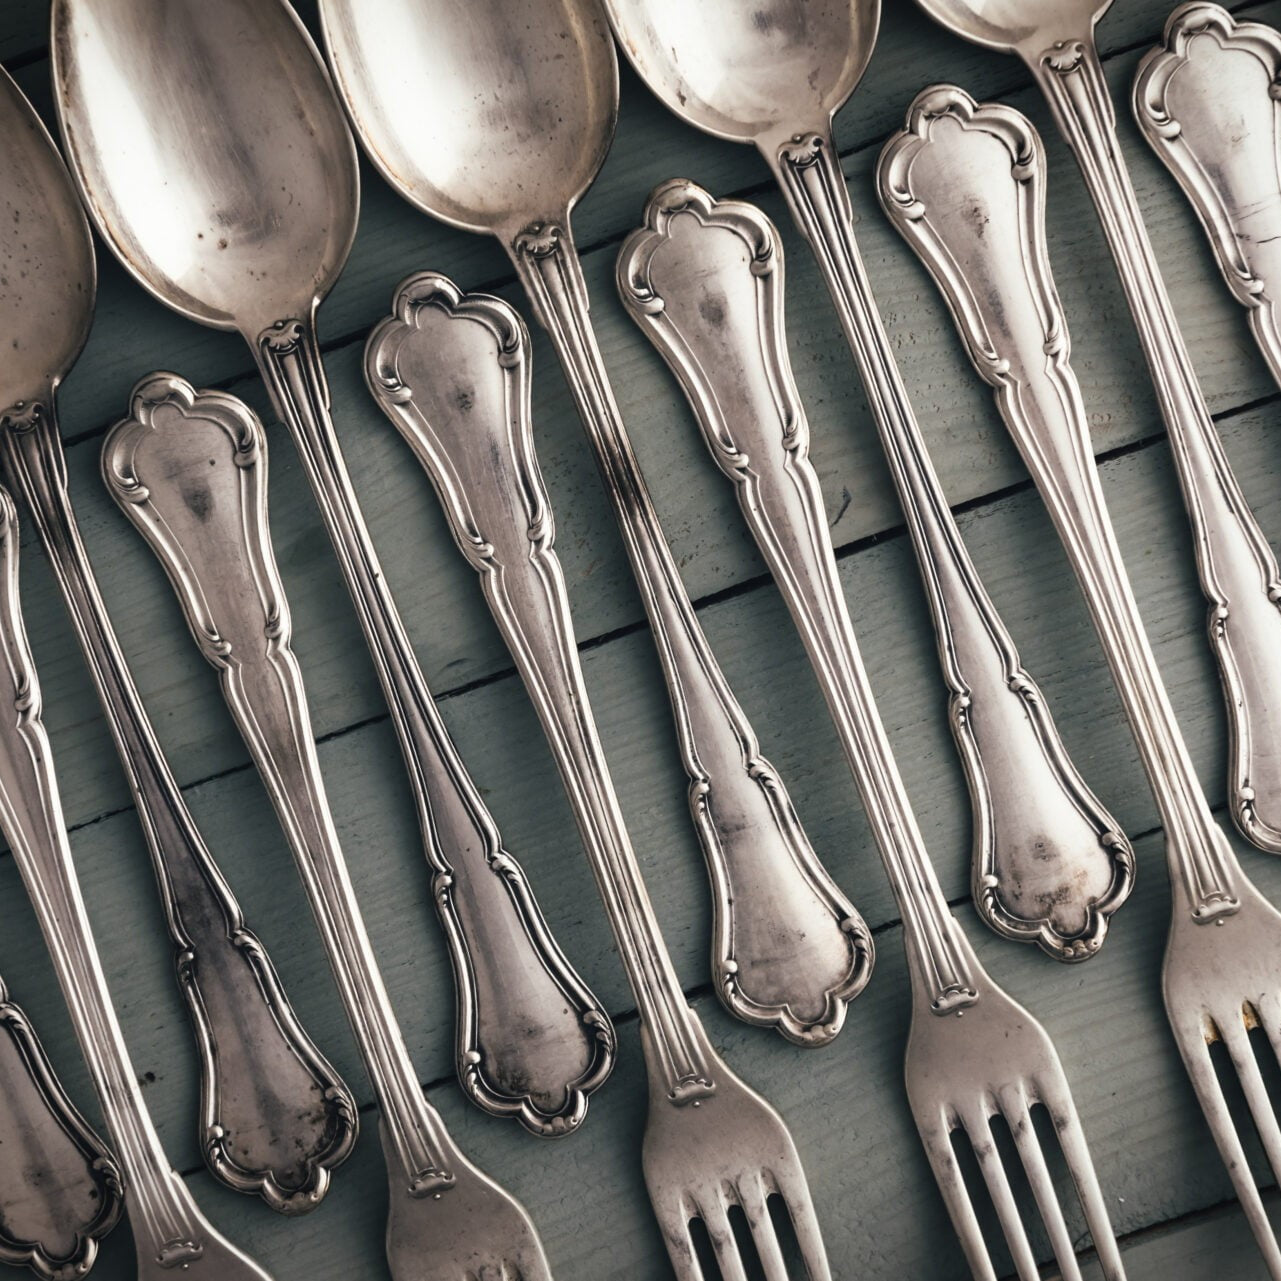 Collectibles - Flatware